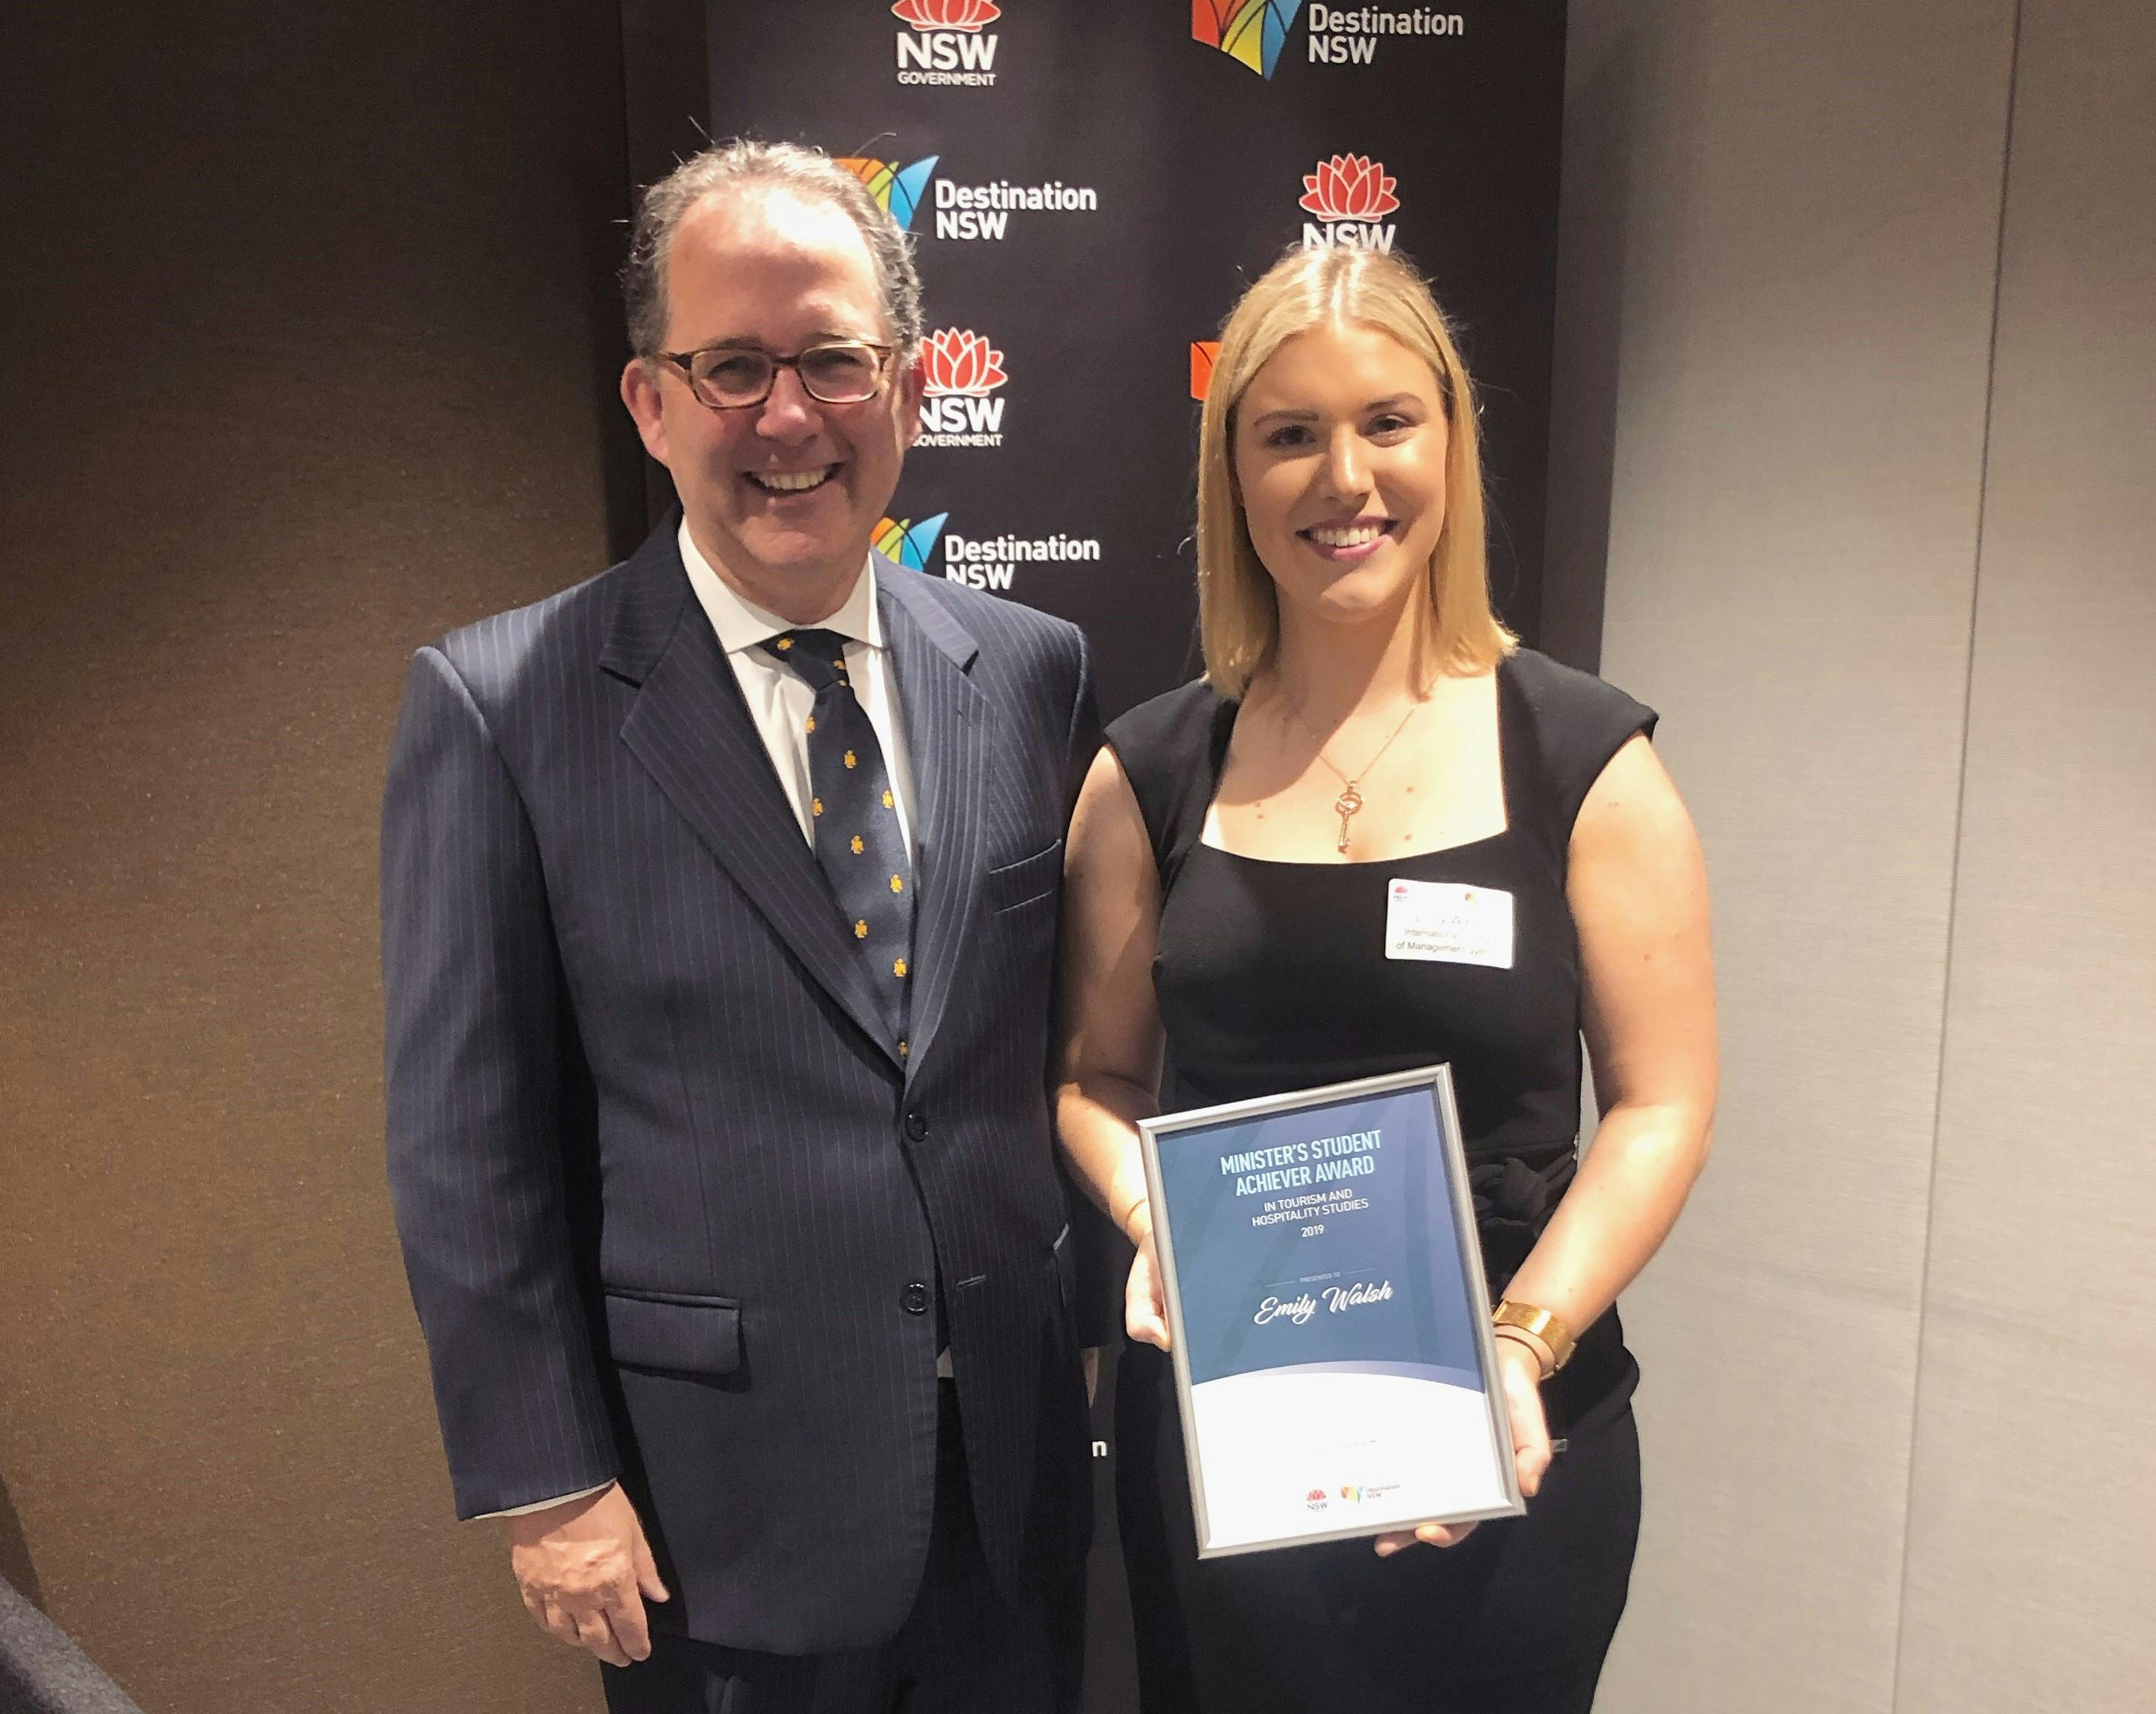 Emily Walsh - Minister's Student Achiever Award Recipient 2019 